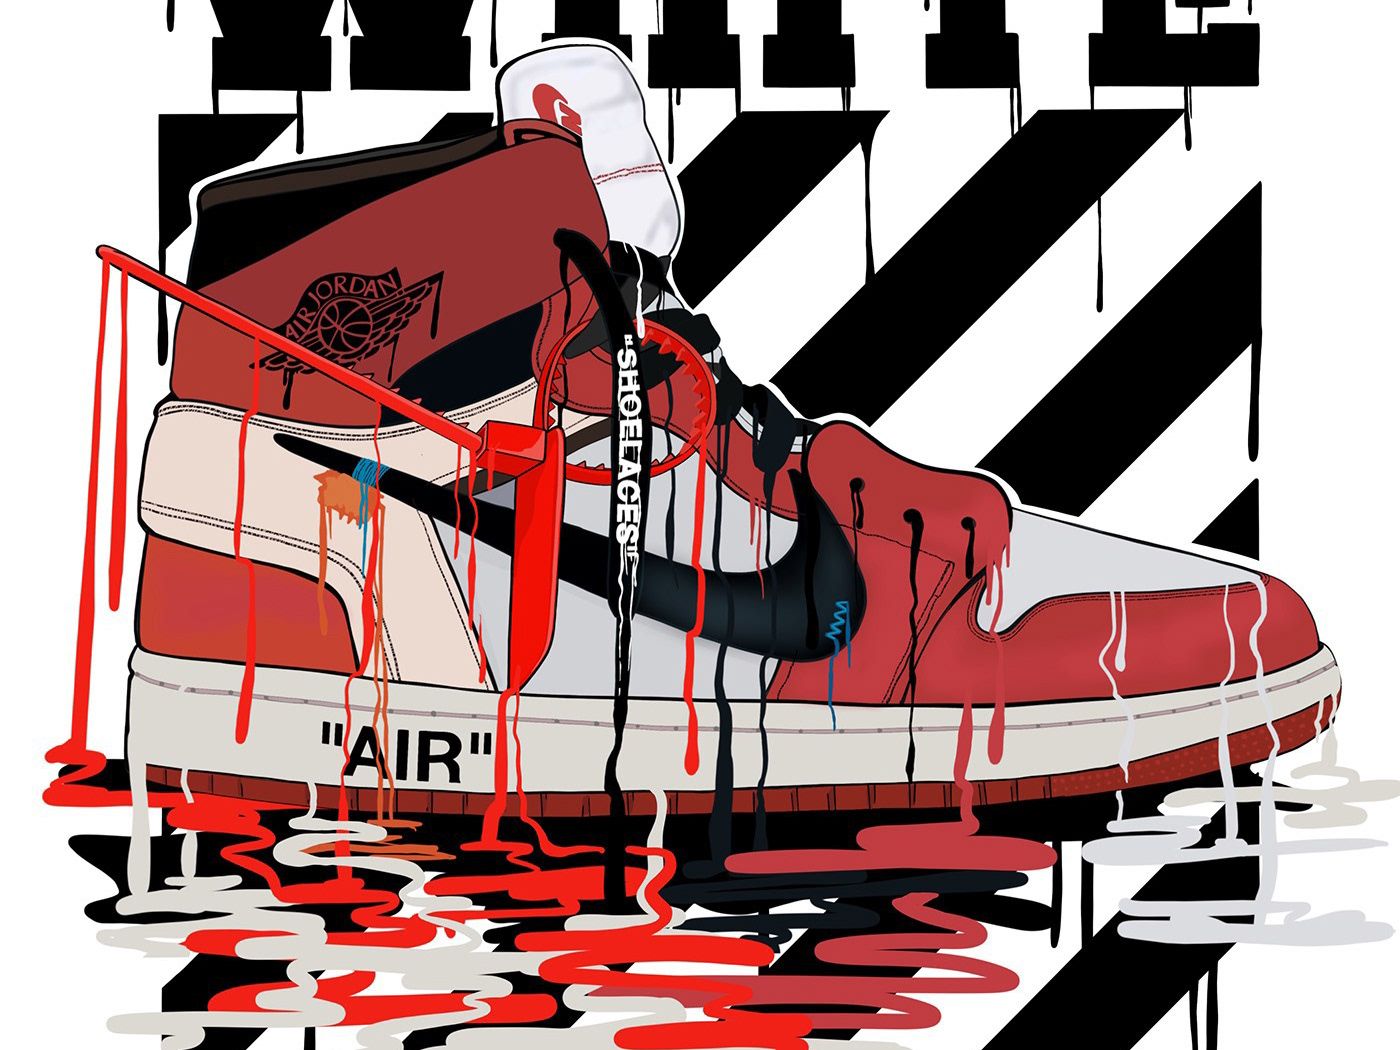 Off White Shoes Wallpaper